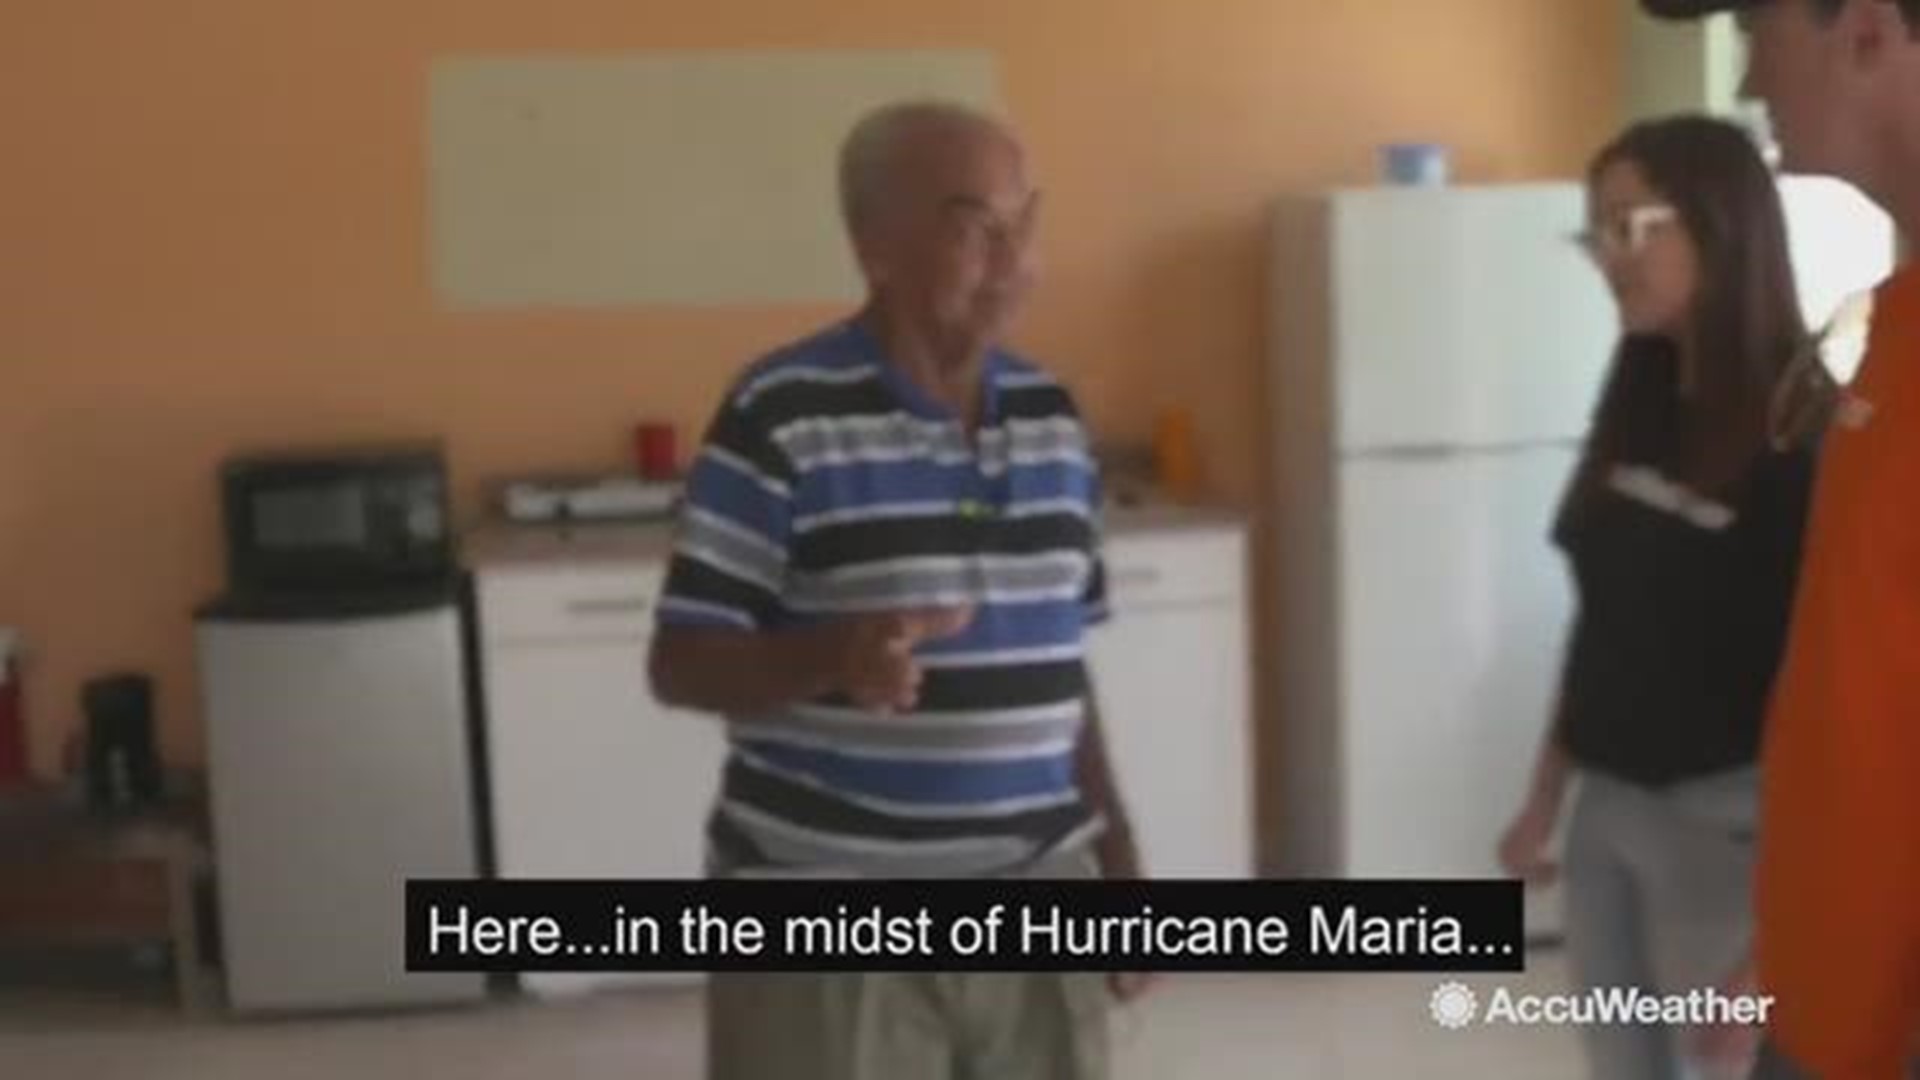 Now a year later, residents of Puerto Rico are still suffering from the effects of Hurricane Maria. In this preview, Jonathan Petramala checks in with the victims of Hurricane Maria. Join us during the month of September to see what he found. 